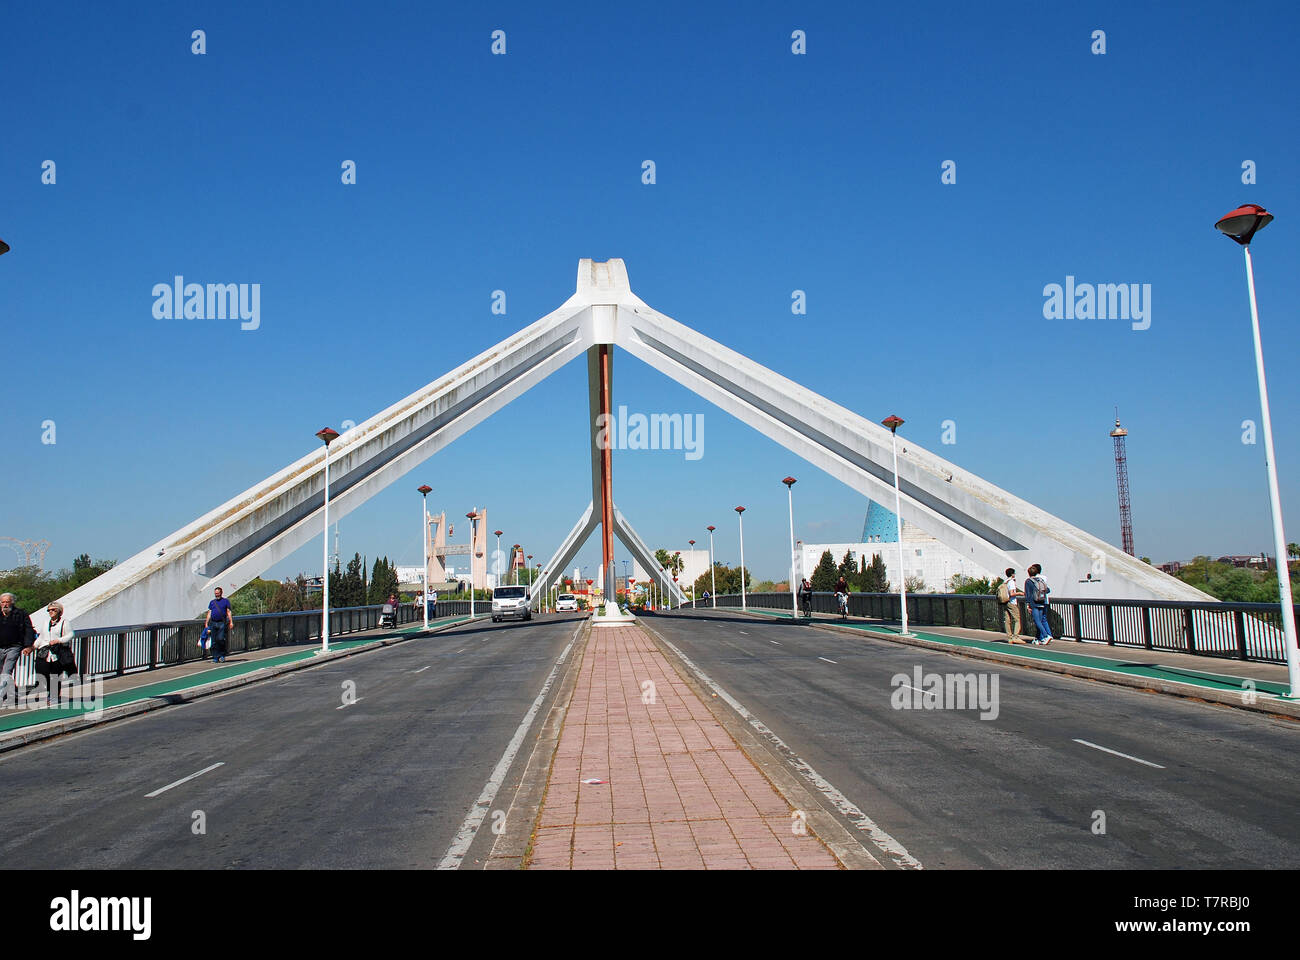 The Puente de la Barqueta in Seville, Spain on April 3, 2019. The suspension bridge was completed in 1992 for access to the Universal Exposition. Stock Photo